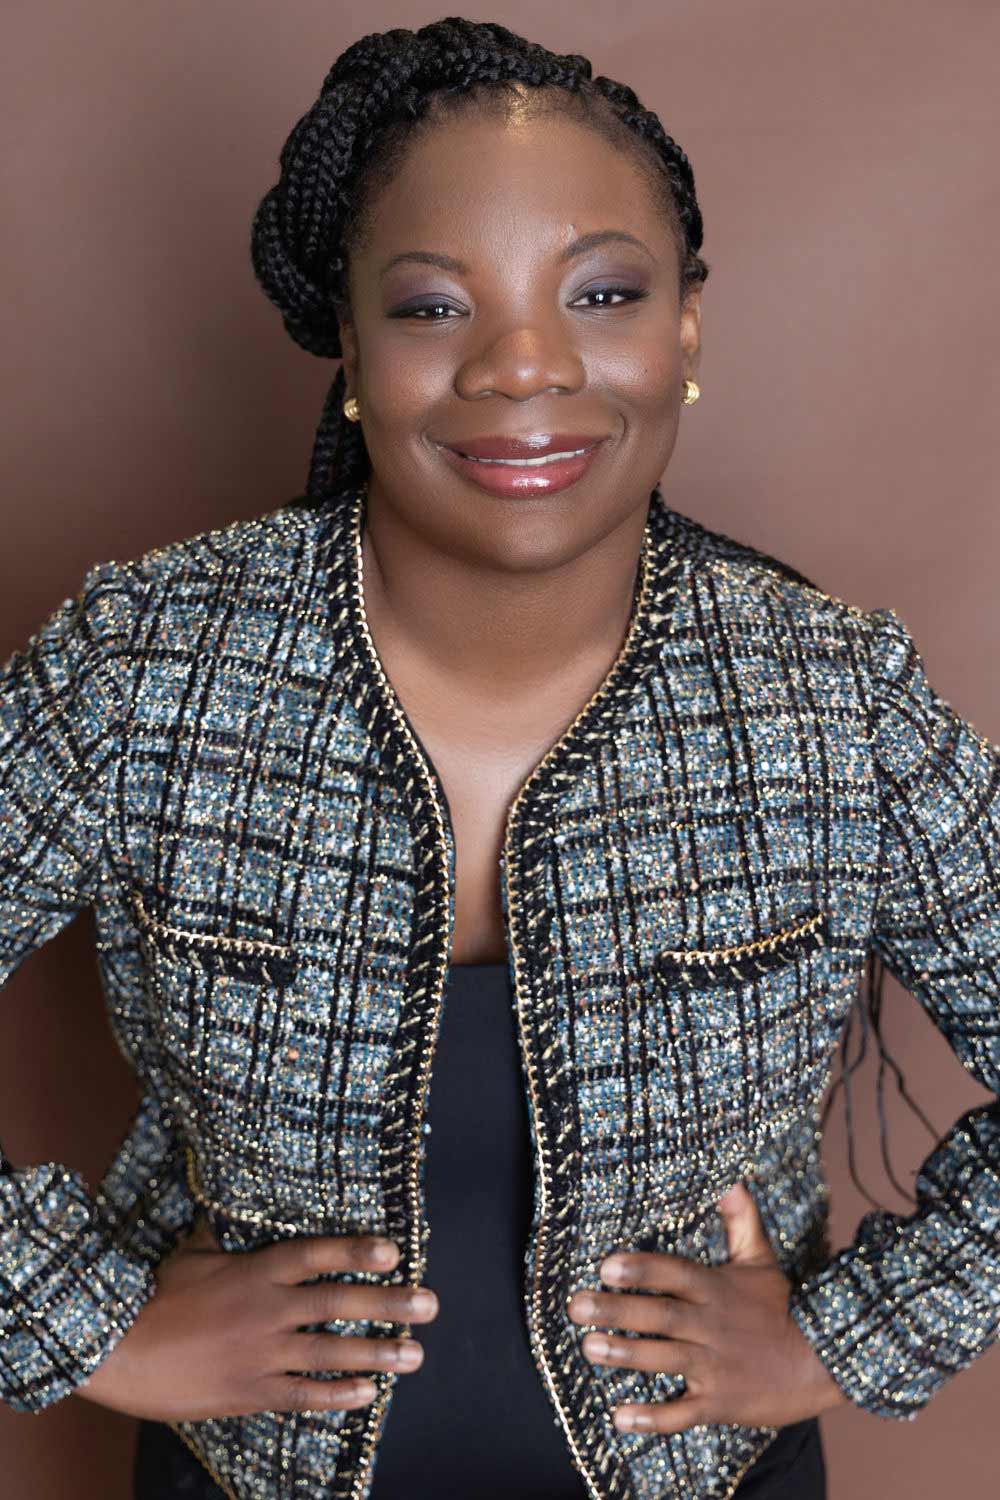 A portrait photo of Dr. Fumilayo Showers.